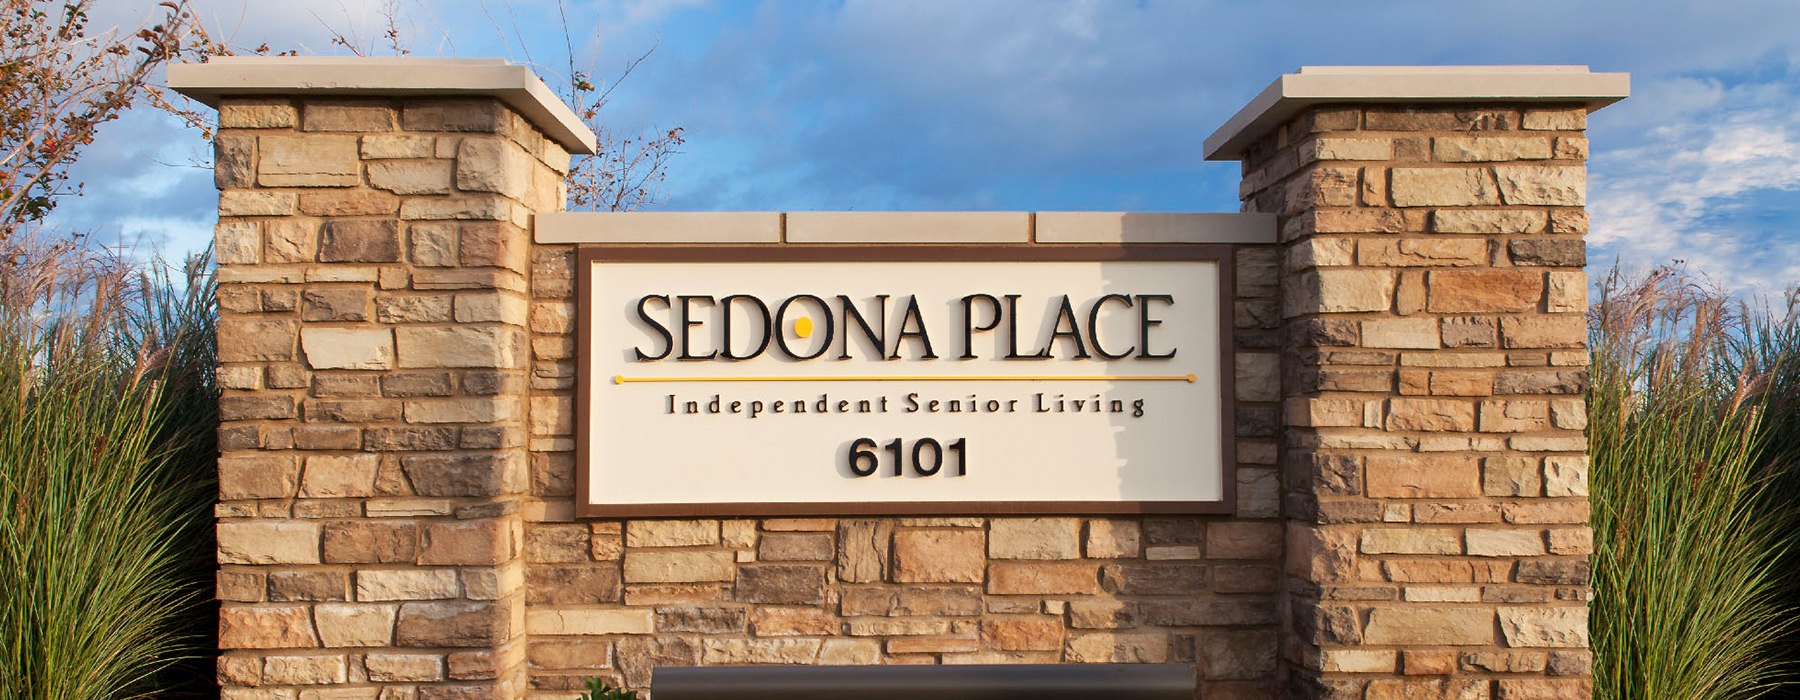 Main sign for Sedona Place 